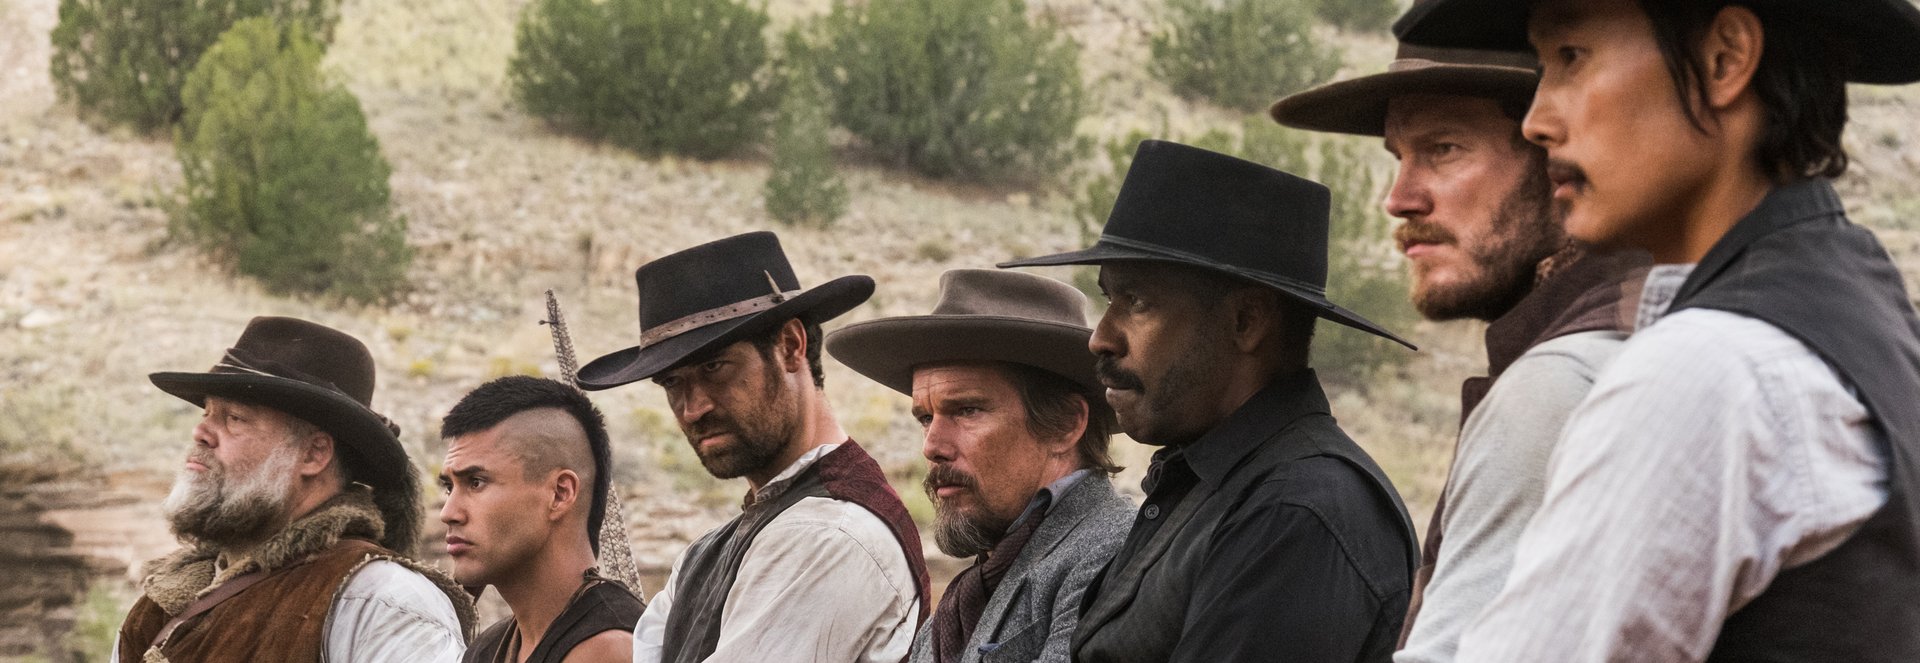 Scene from The Magnificent Seven. Copyright, Columbia Pictures, a division of Sony Pictures